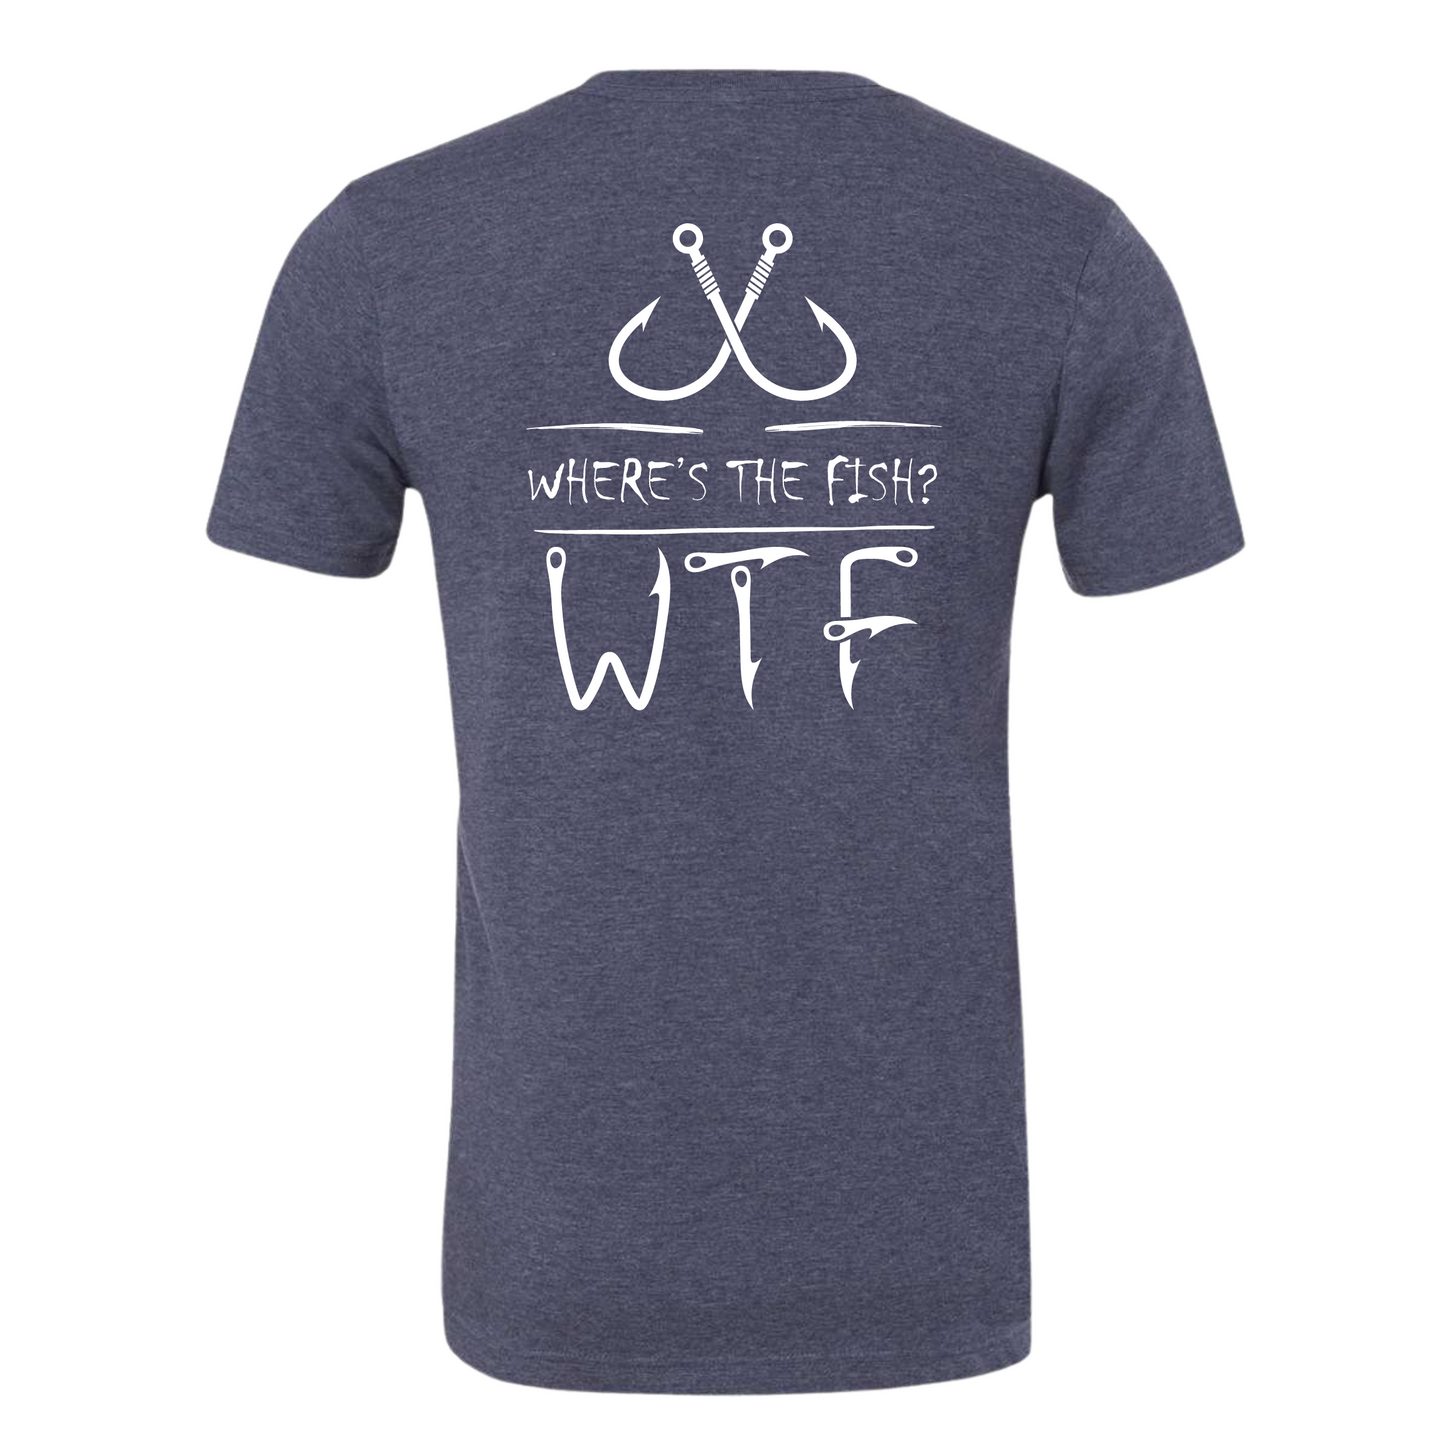 Where's the Fish Short Sleeve Adult Tee